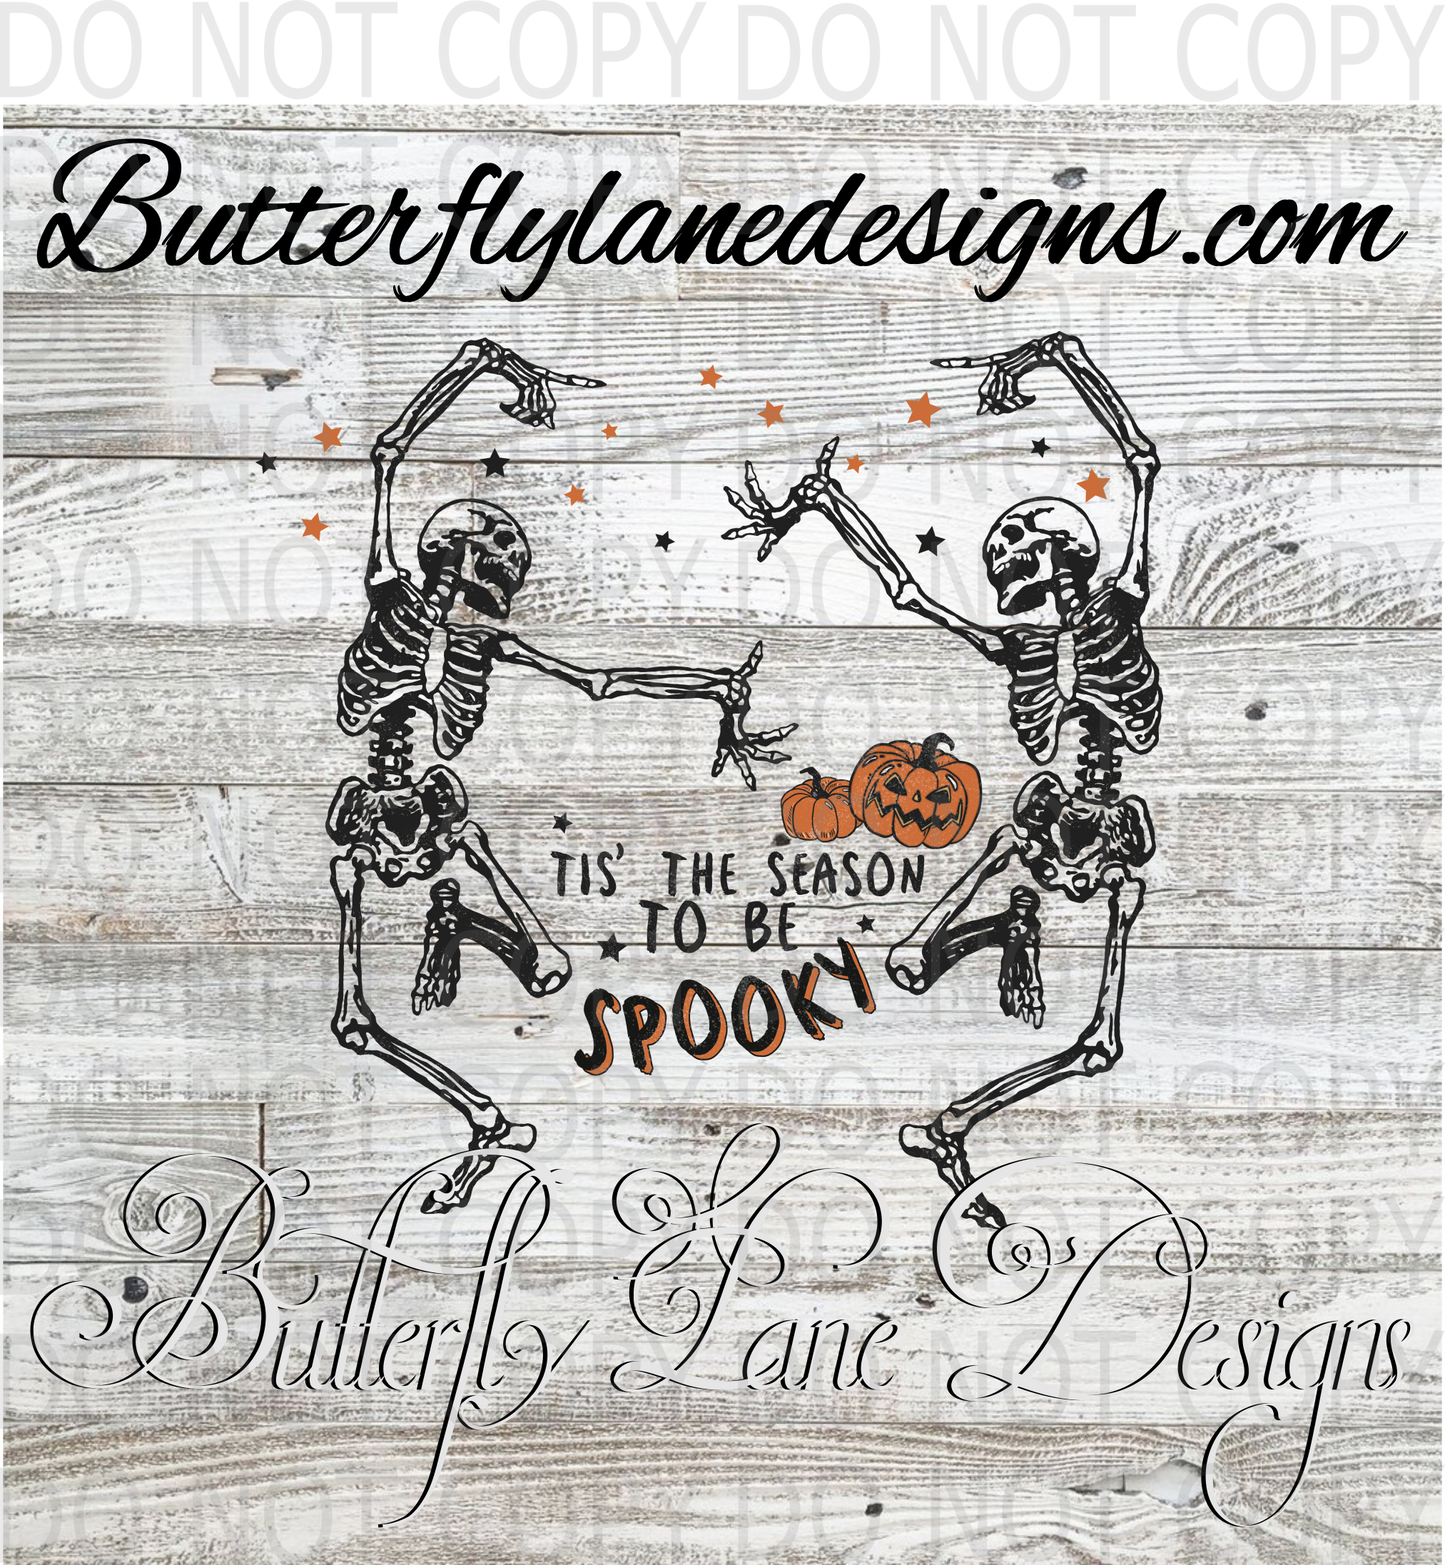 Tis the season to be spooky Skelly dances- :: Clear Decal :: VC Decal